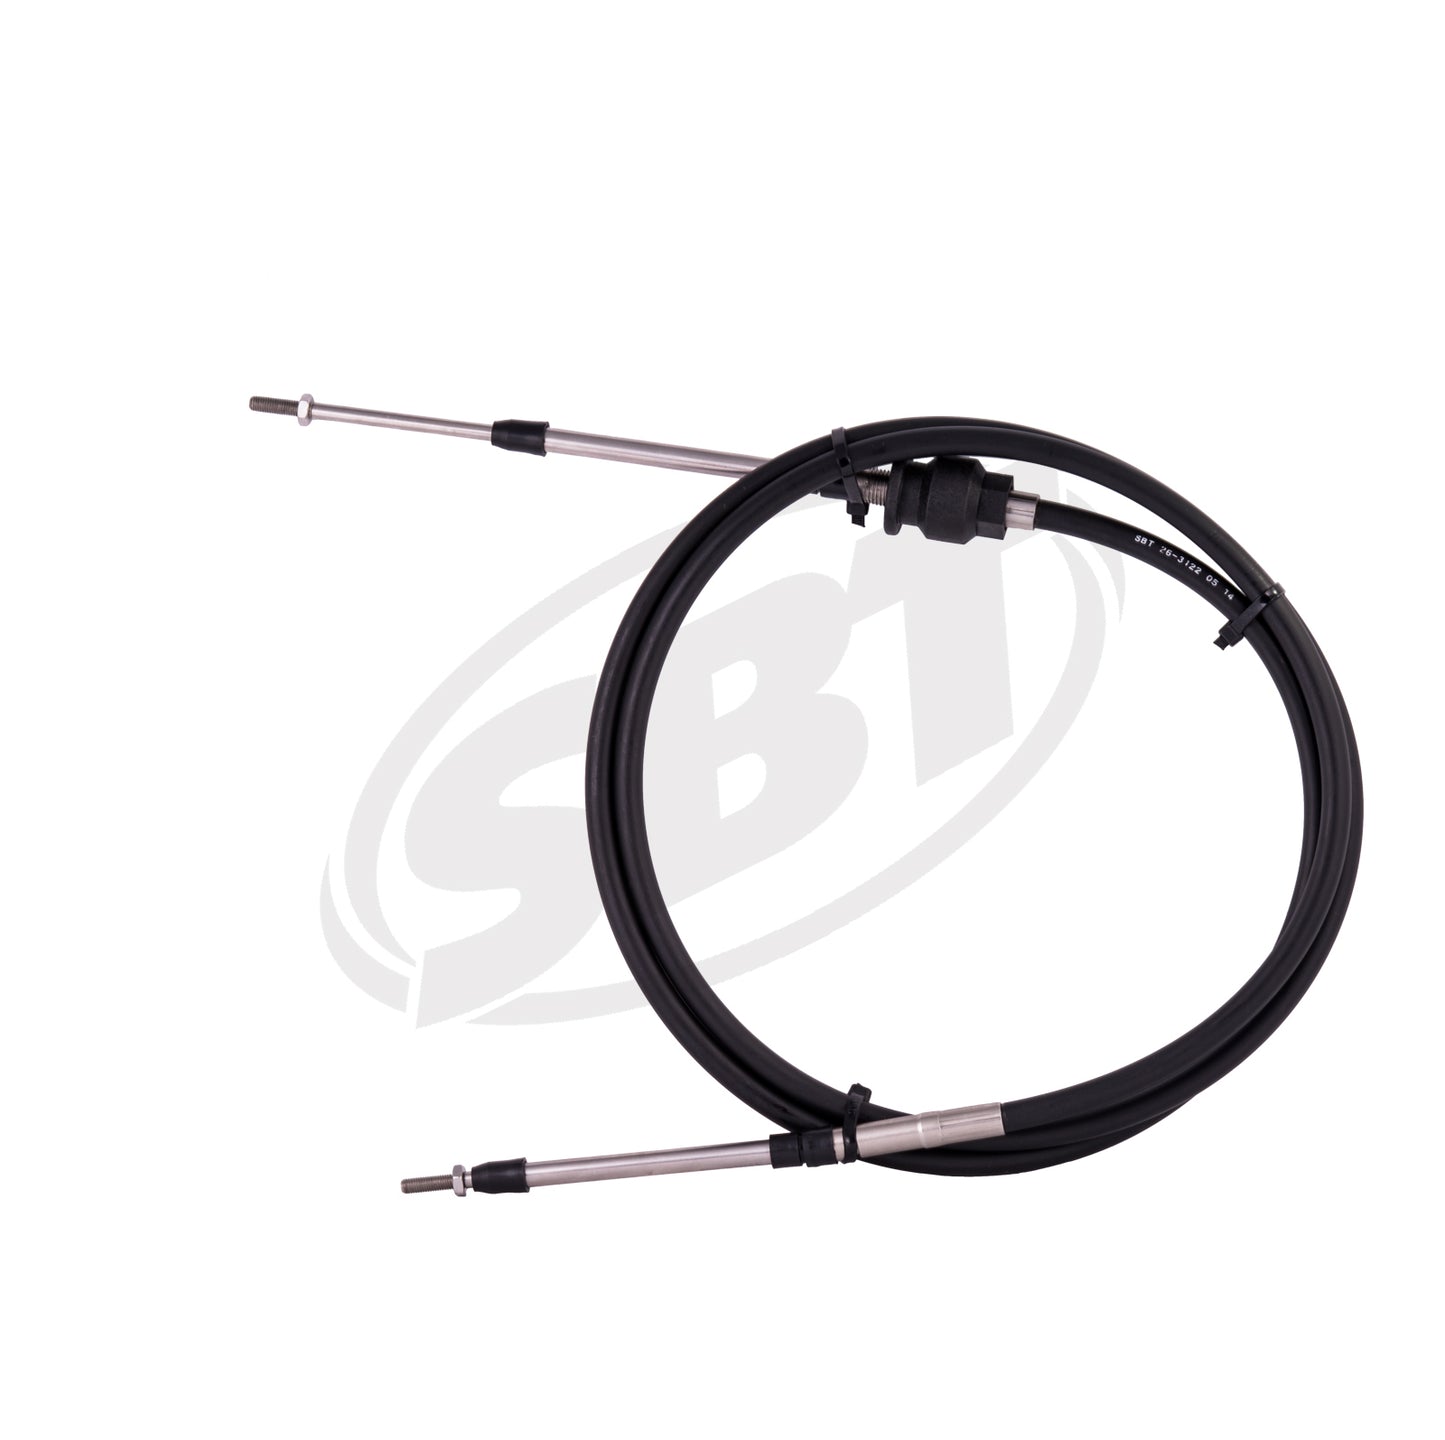 SBT Sea-Doo Steering Cable GTX /RXT /Wake Pro 215 277001327 2010